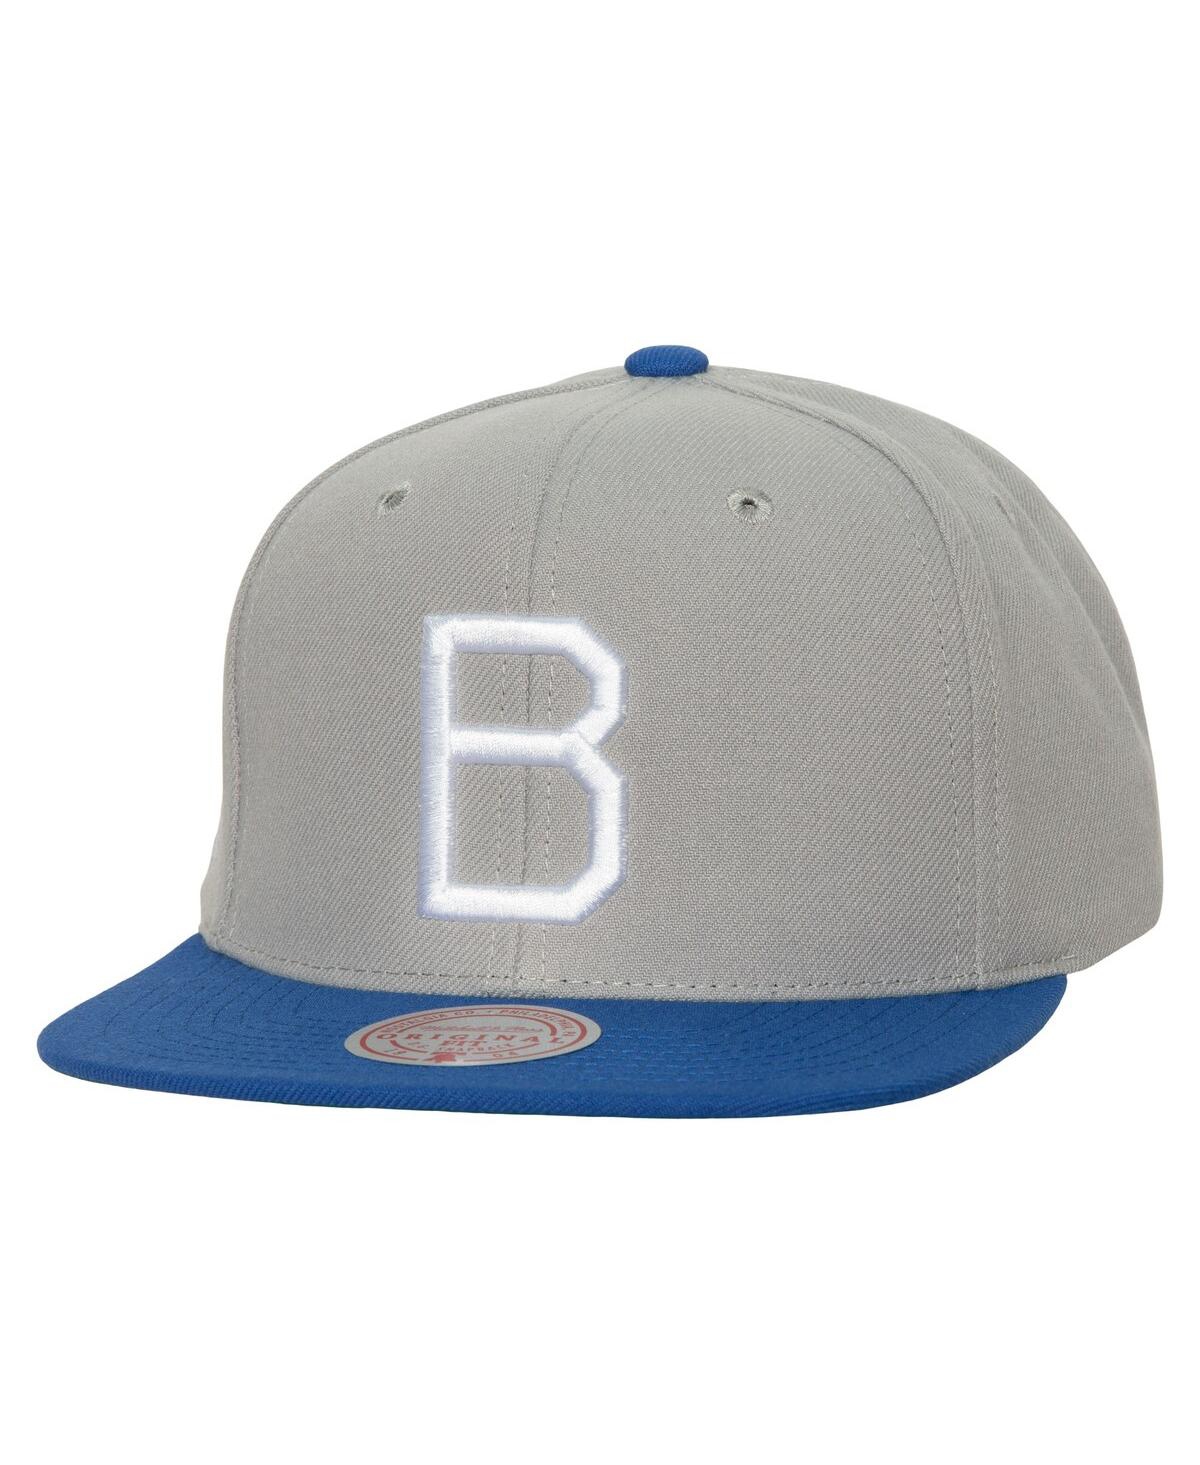 Mitchell & Ness Men's  Gray Brooklyn Dodgers Cooperstown Collection Away Snapback Hat